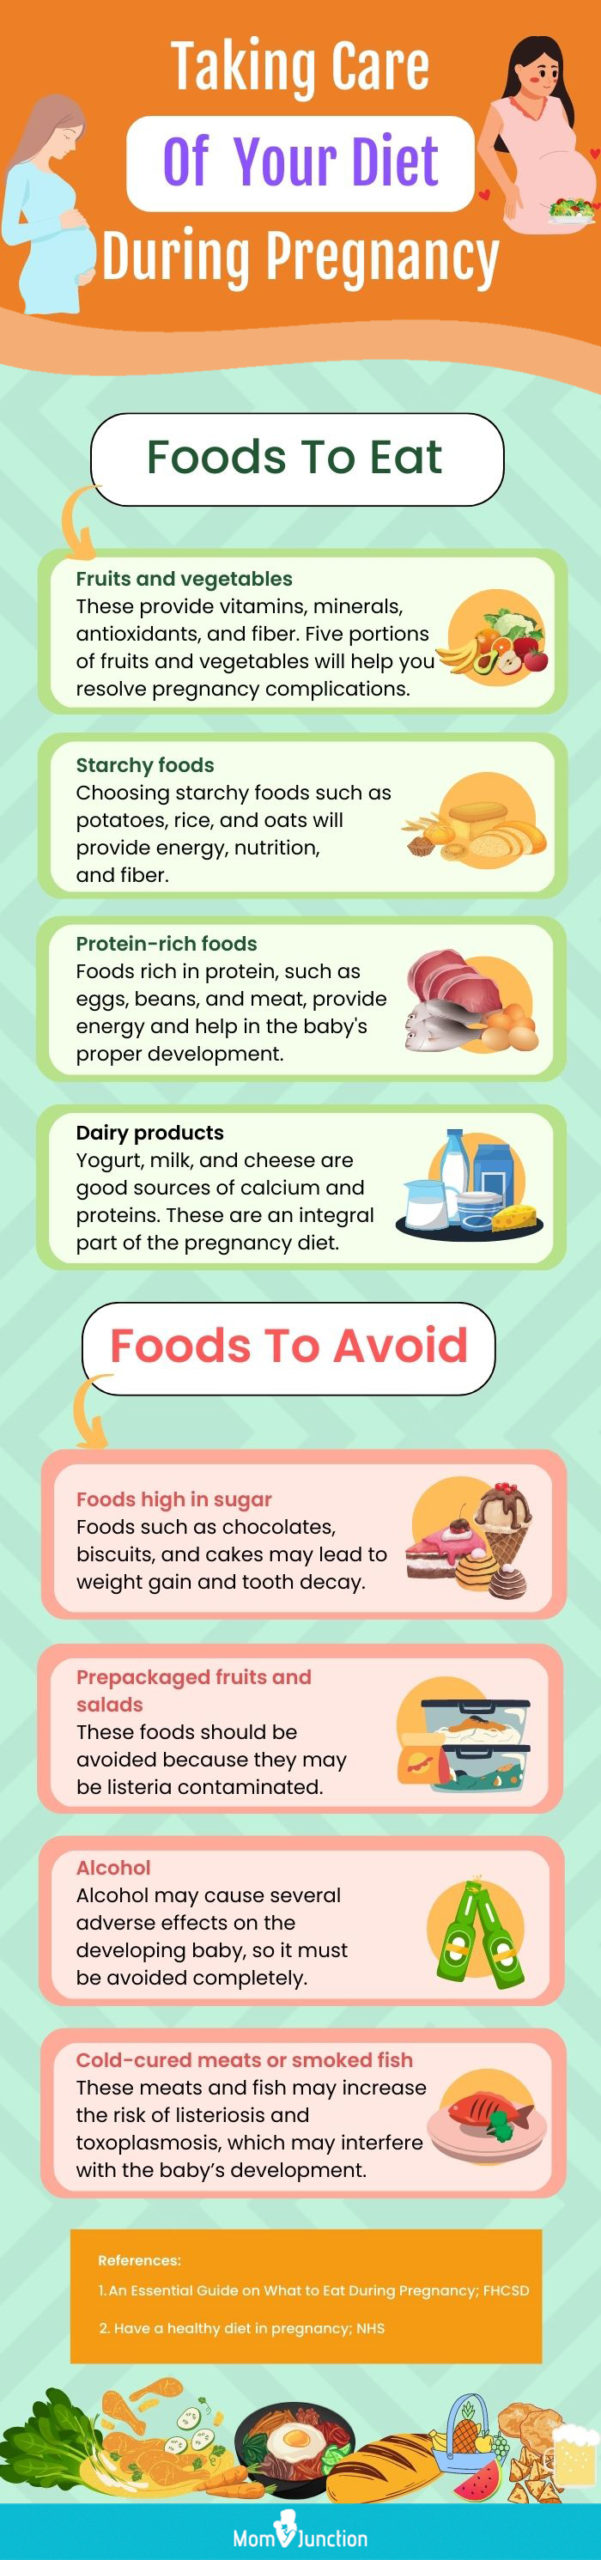 taking care of your diet during pregnancy (infographic)